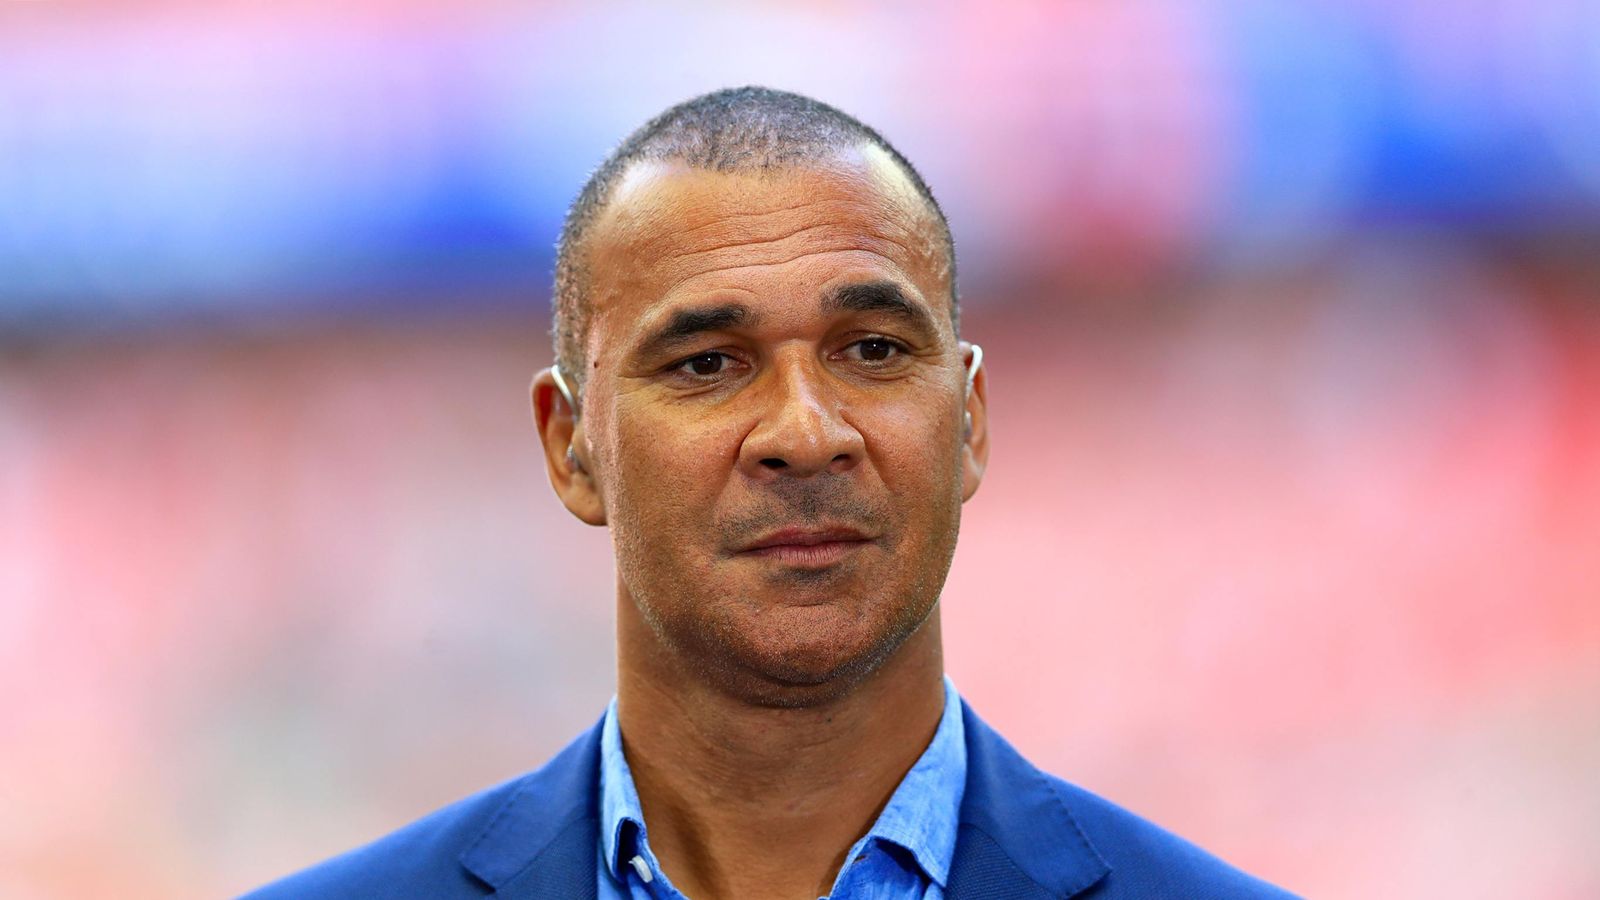 Ruud Gullit launches his own esports FIFA academy | Esports News | Sky